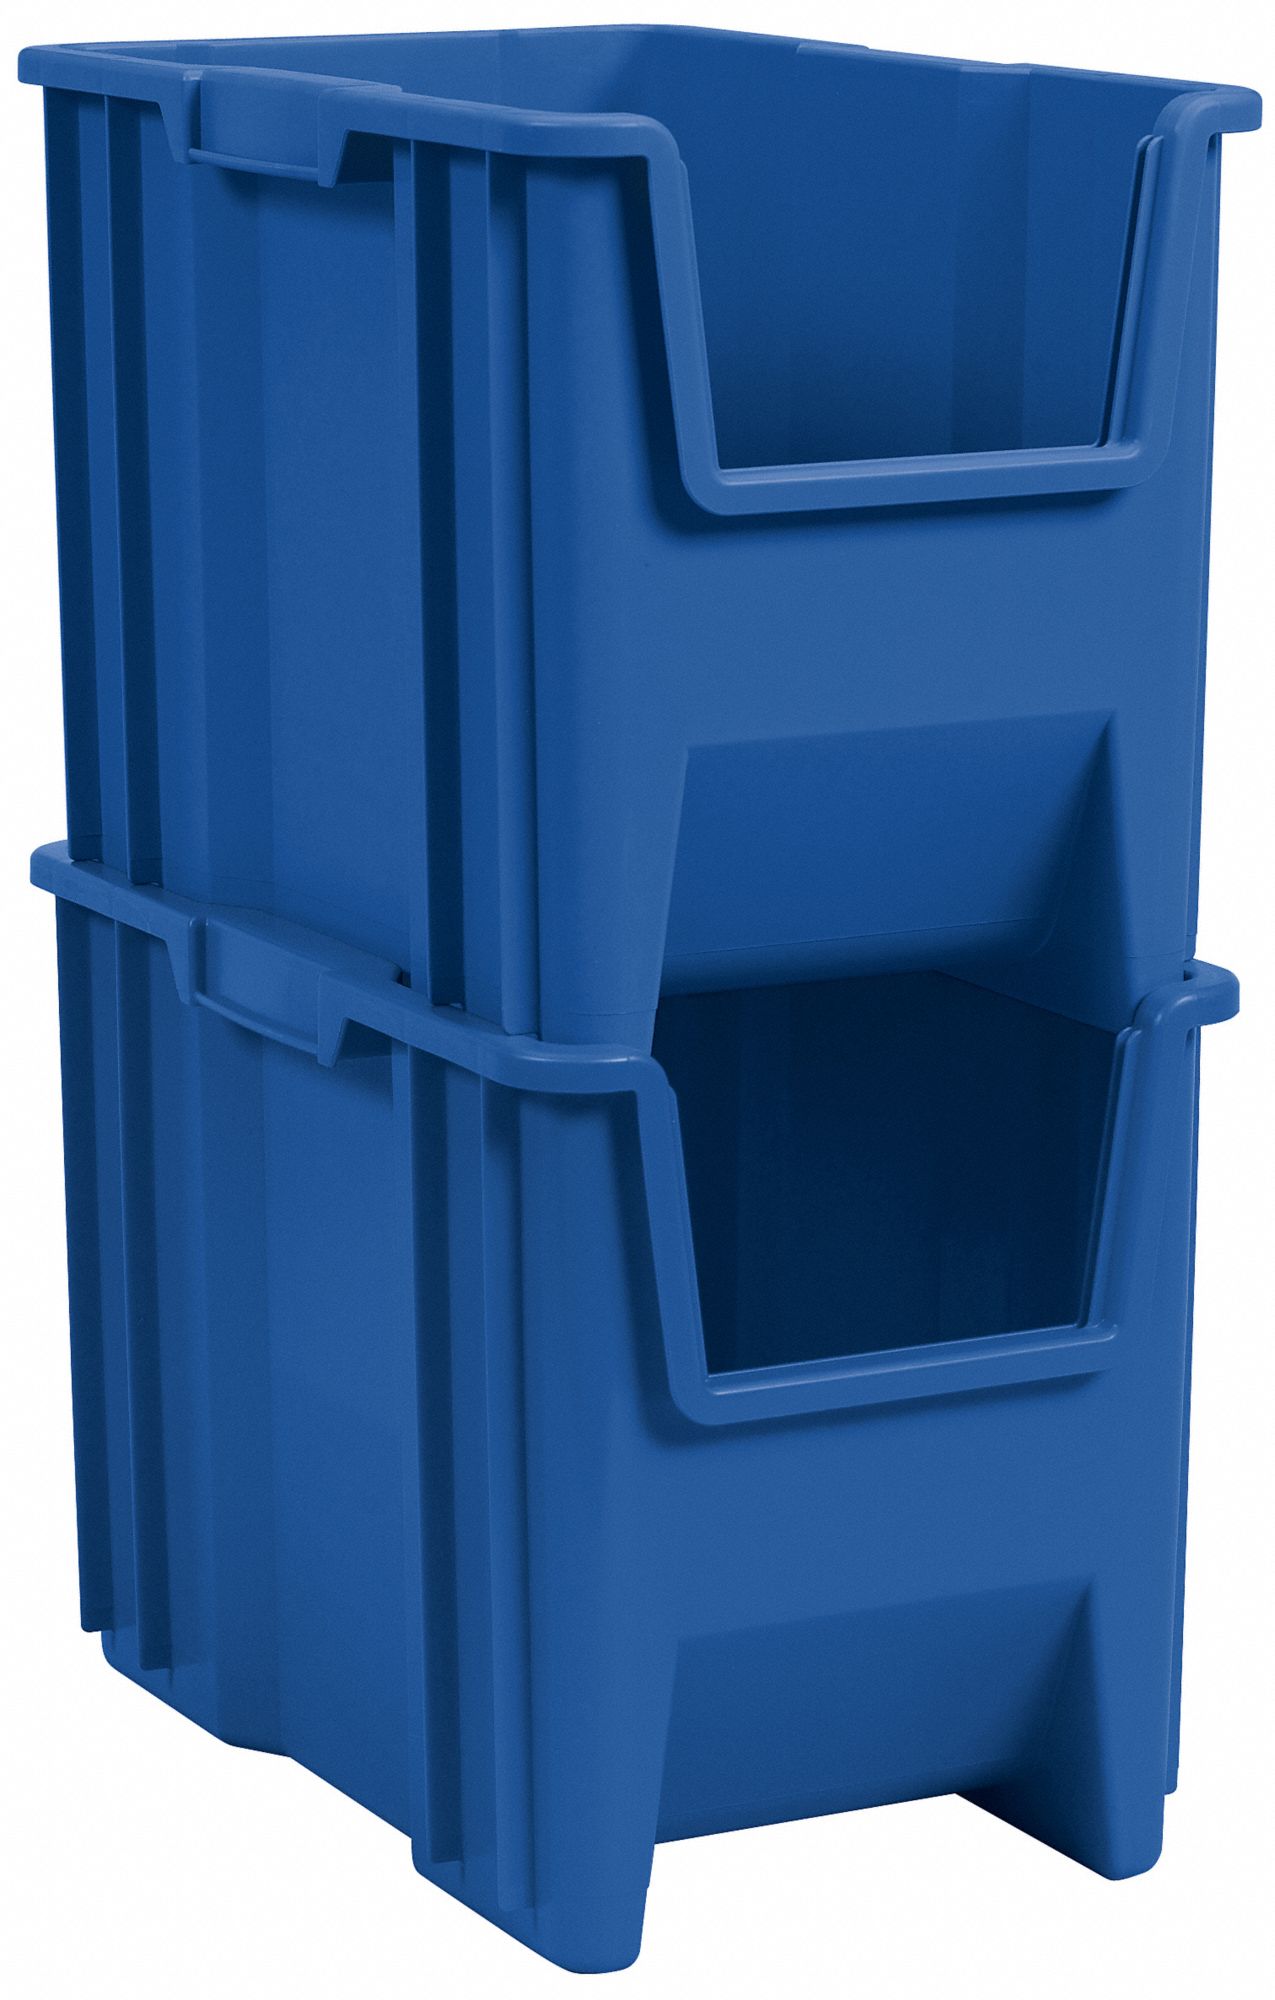 Blue 13014BLUERS 7 Gallon ReadySpace 4-Pack Heavy-Duty Open-Front Stacking Recycling Bins Plastic Containers